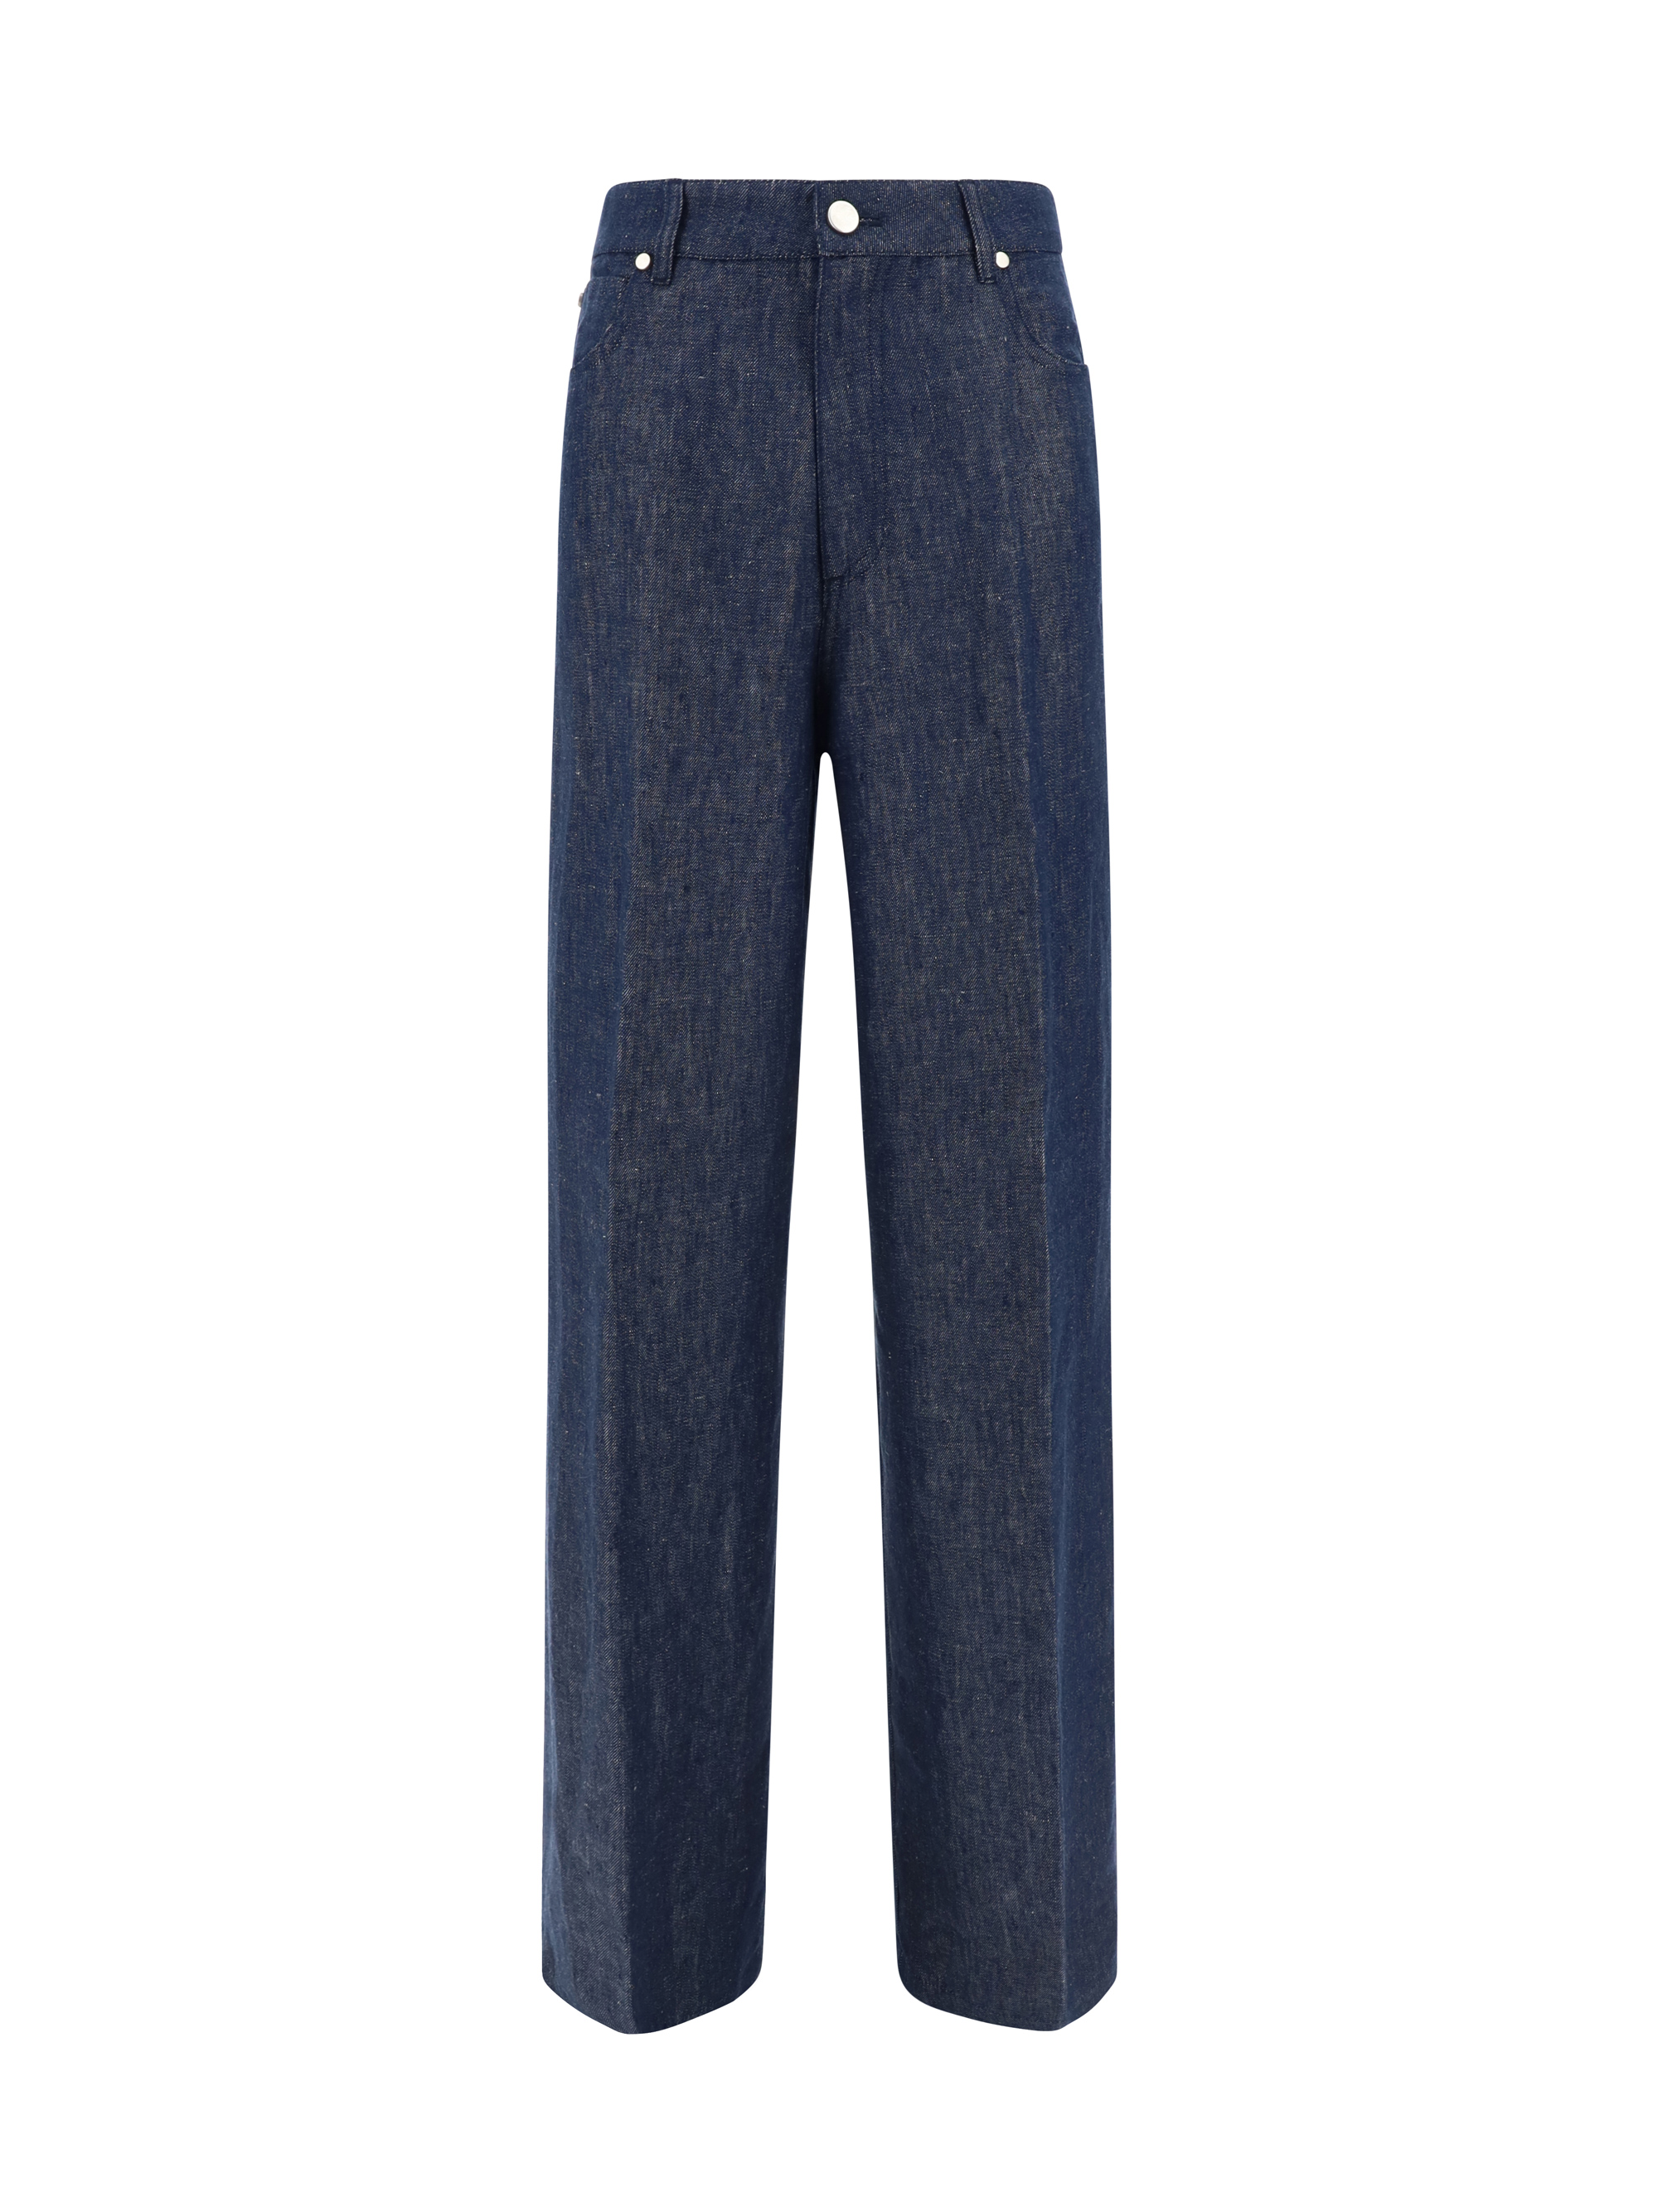 Cruna Taylor Pants In Notte